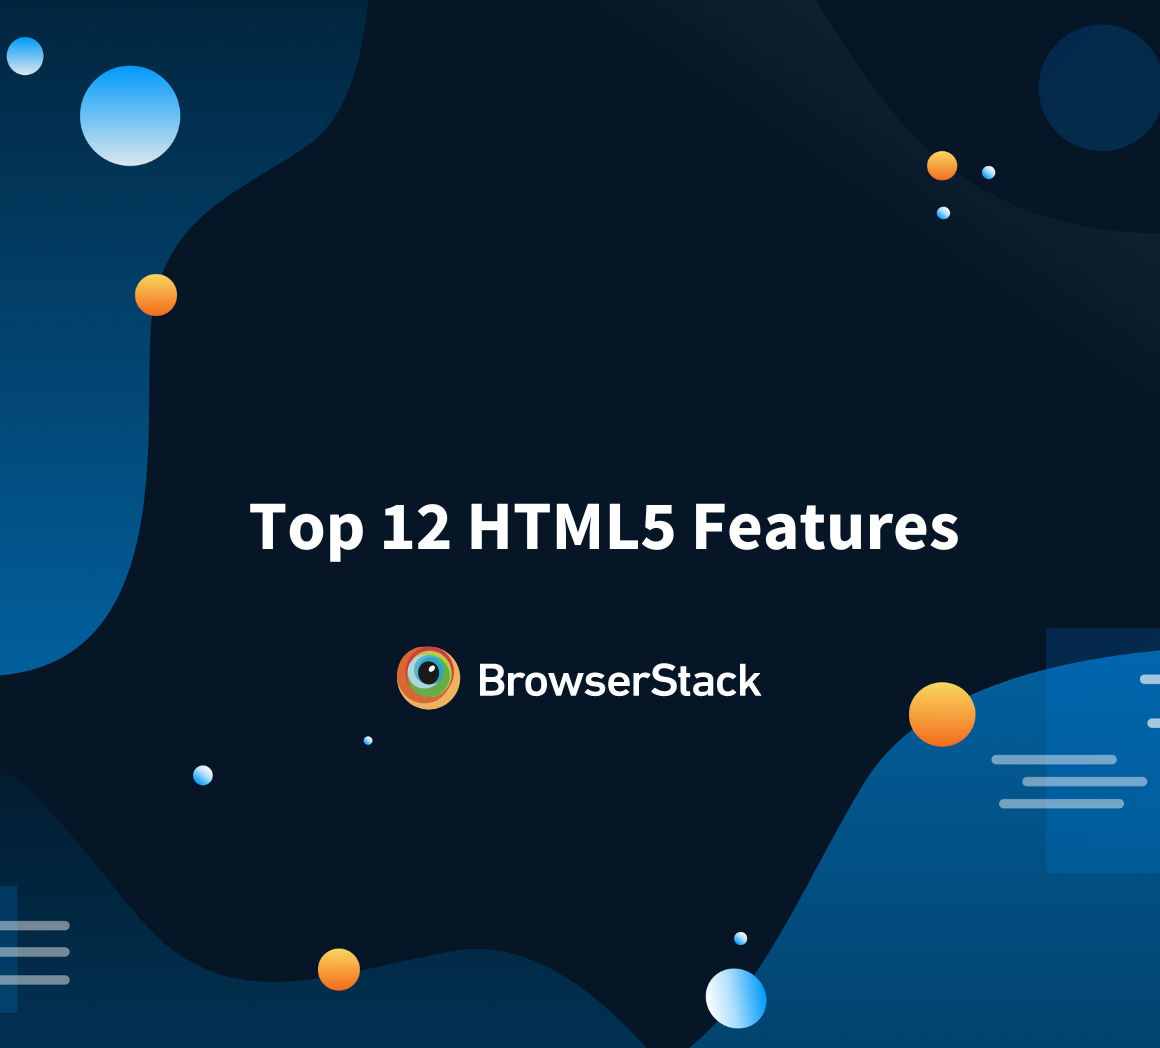 Top 12 HTML5 Features